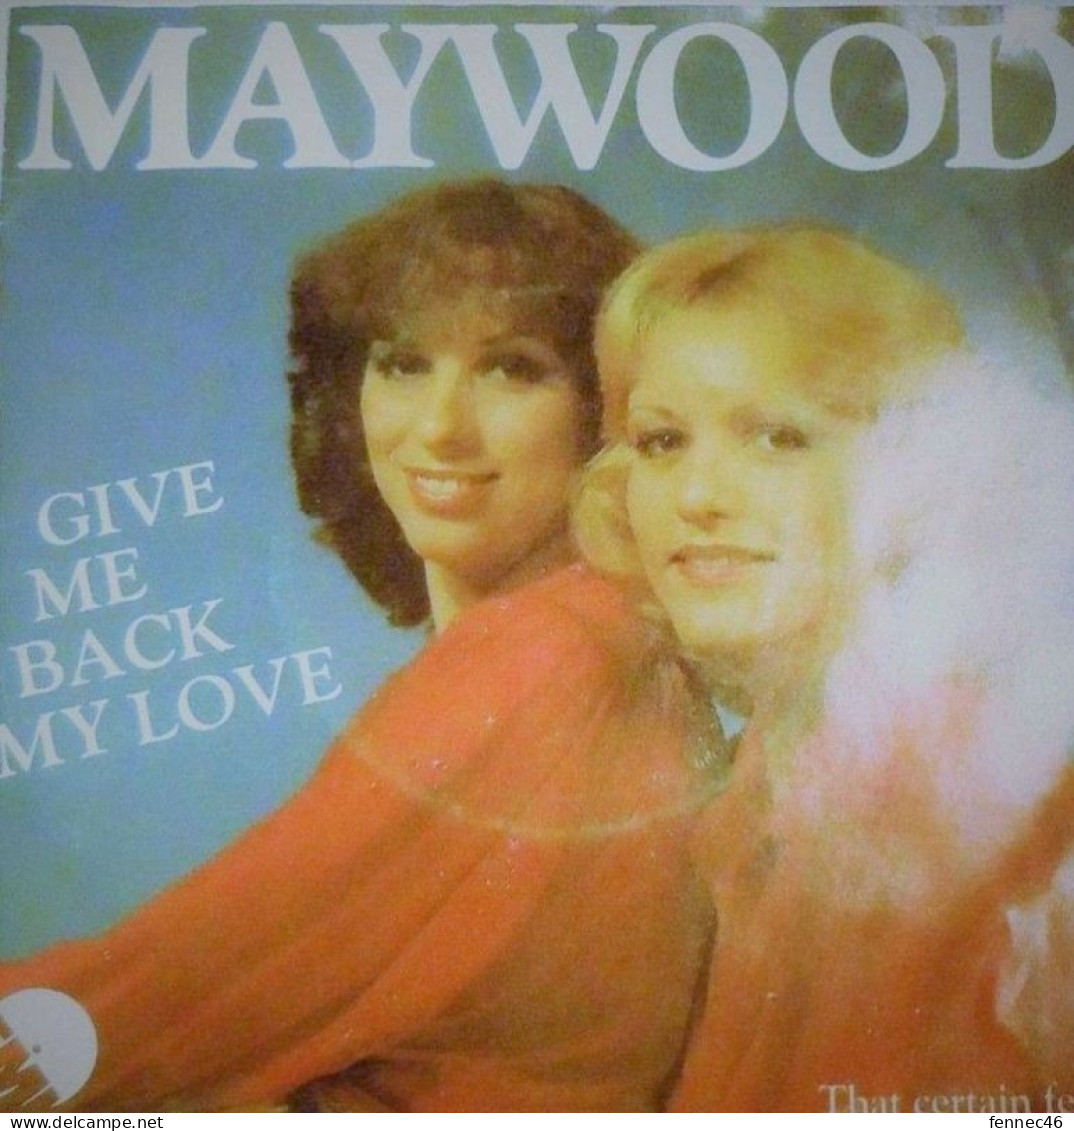 * Vinyle 45t - Maywood Give Me Back My Love - Sonstige - Englische Musik